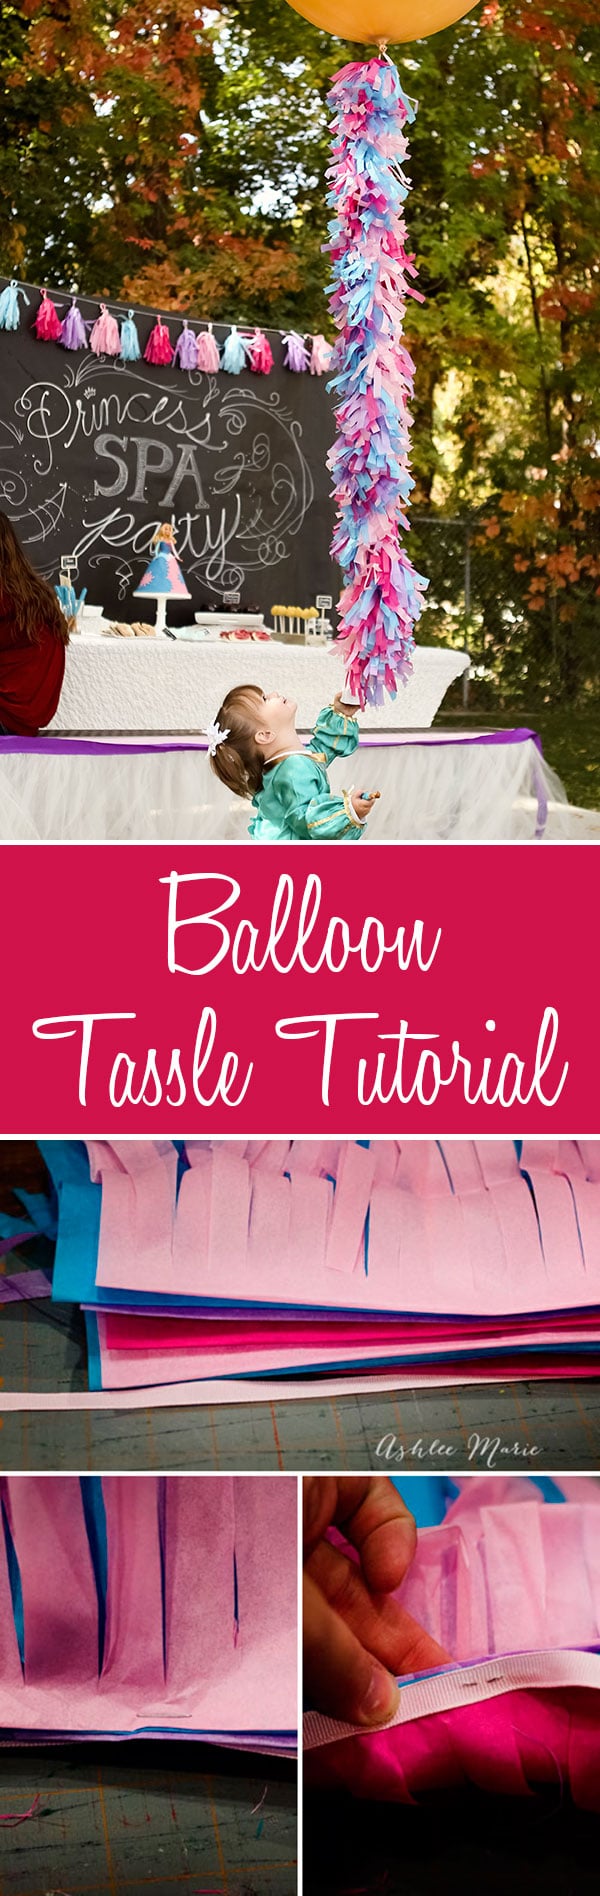 make your own balloon tassels for any party